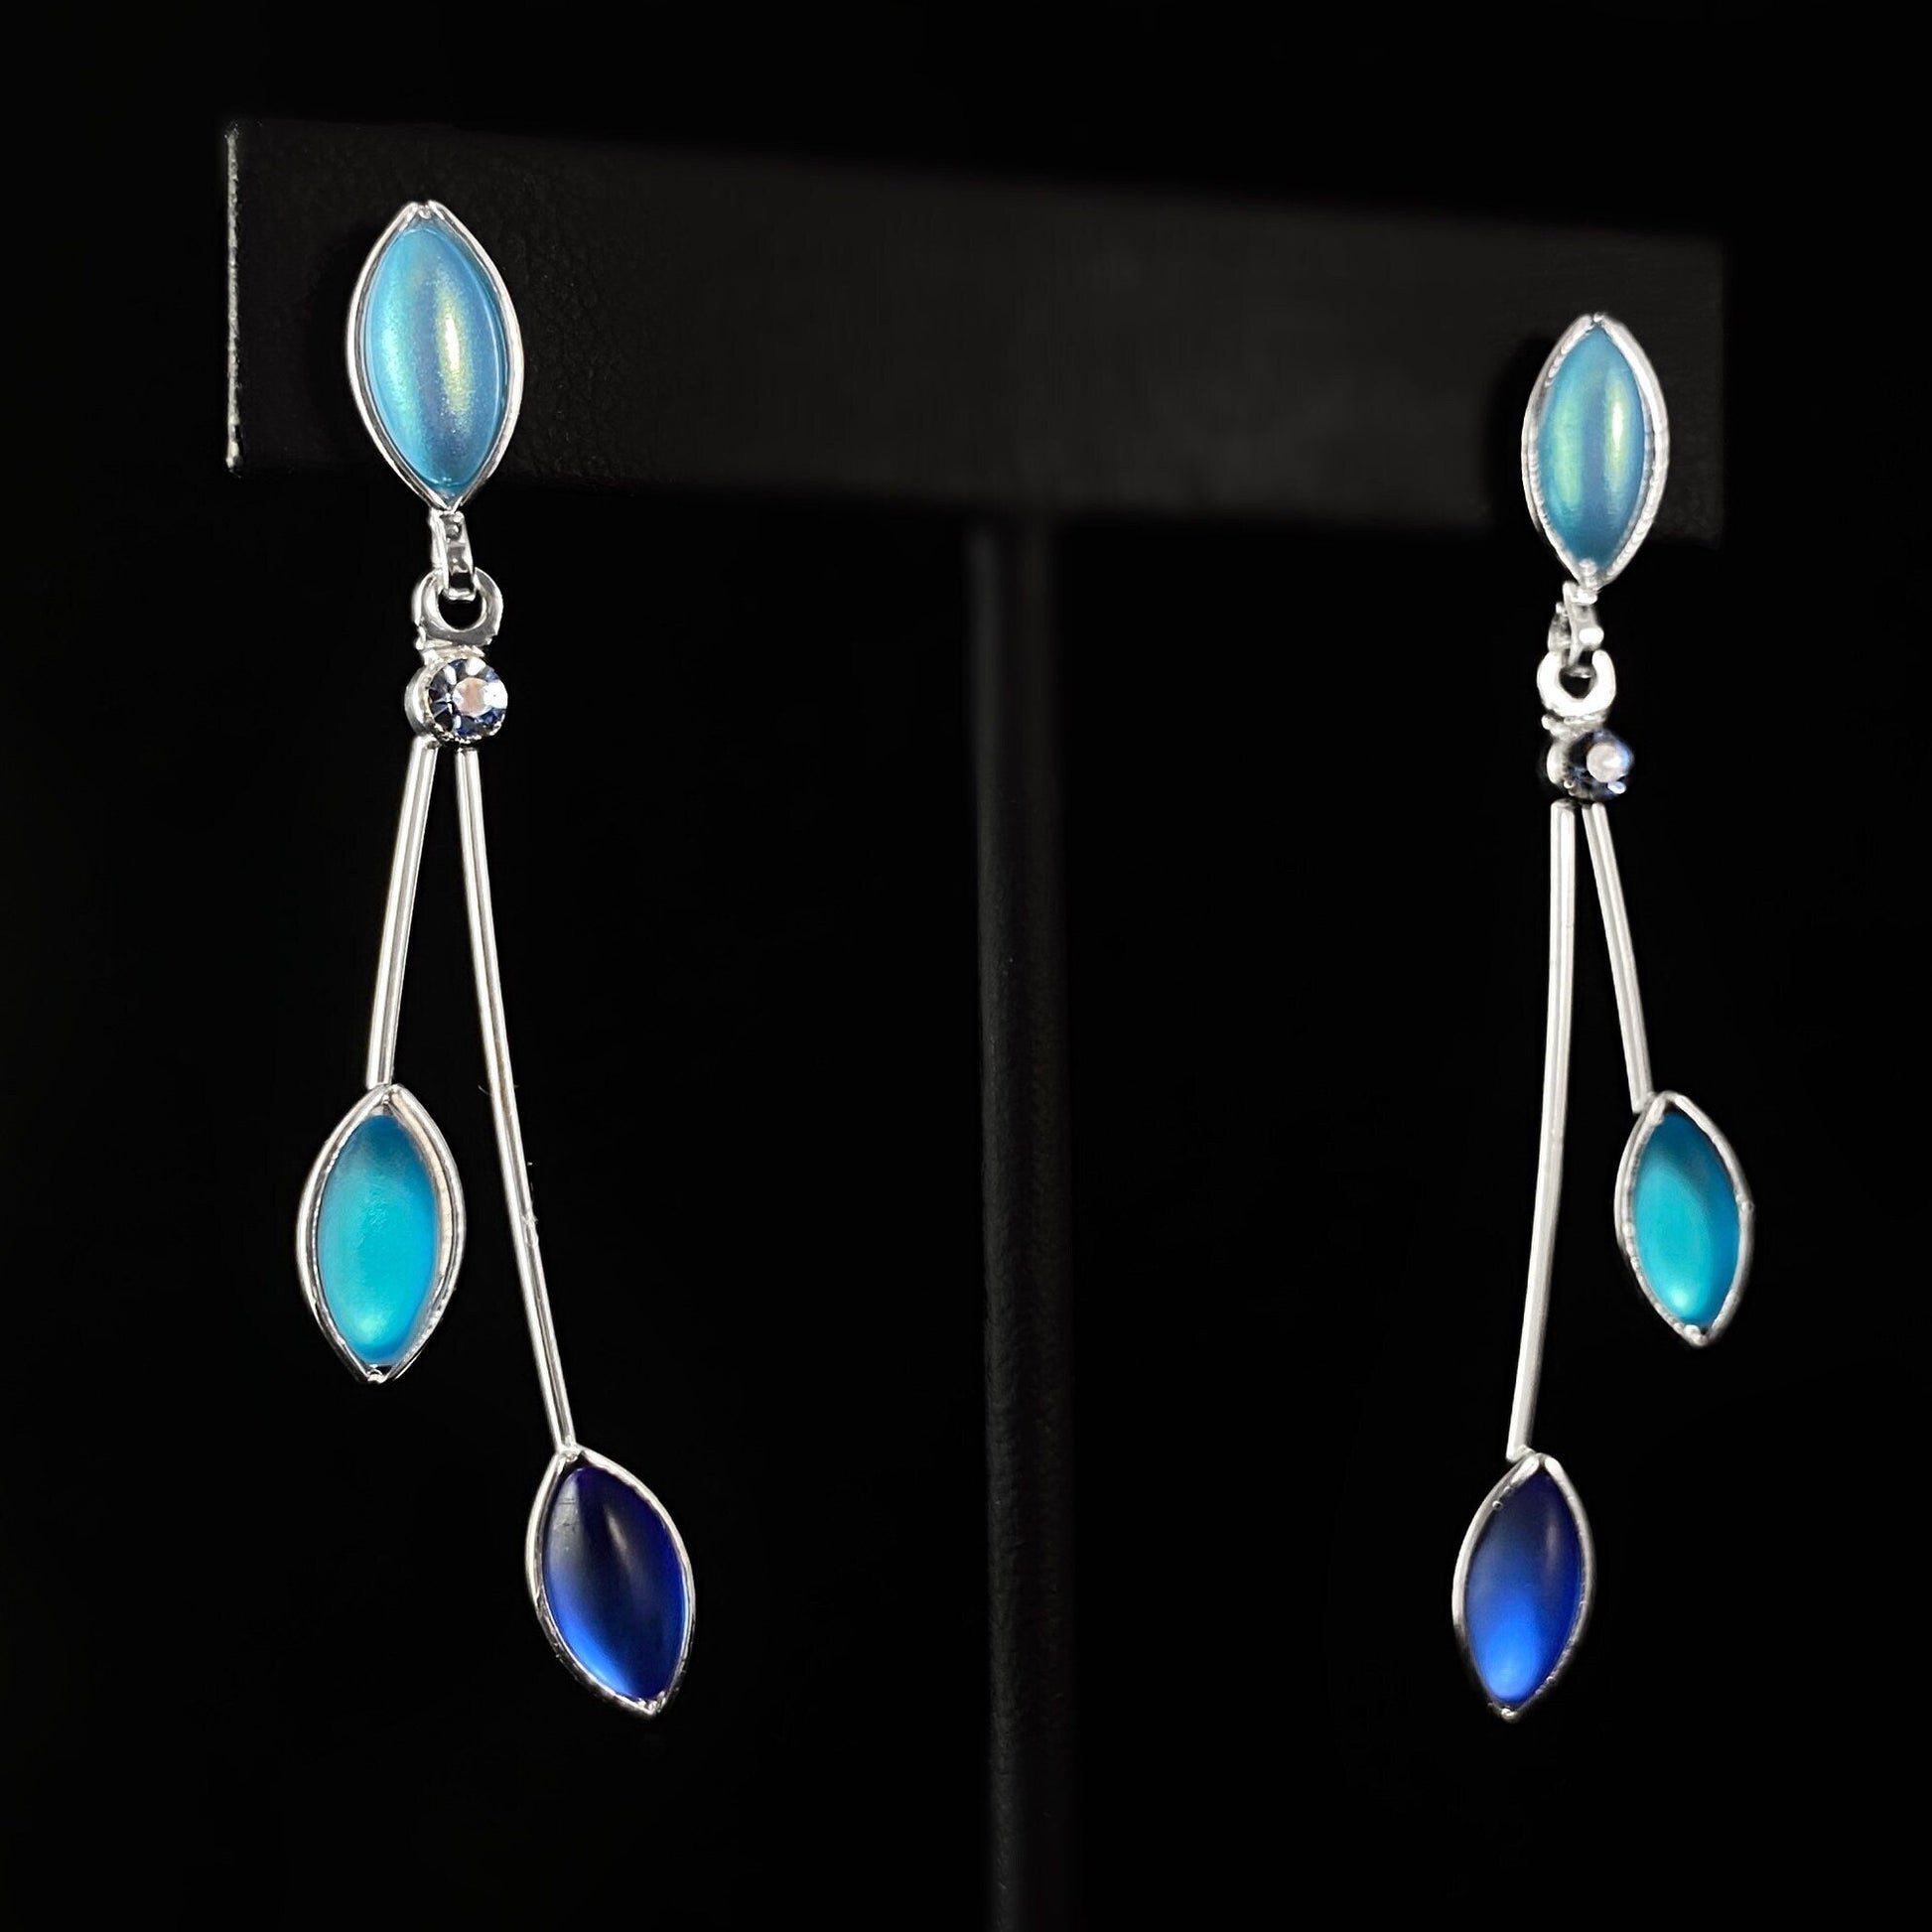 Floral Style Earrings with Silver Wire and Handmade Glass Beads, Hypoallergenic, Aqua/Sapphire/Blue Opal - Kristina